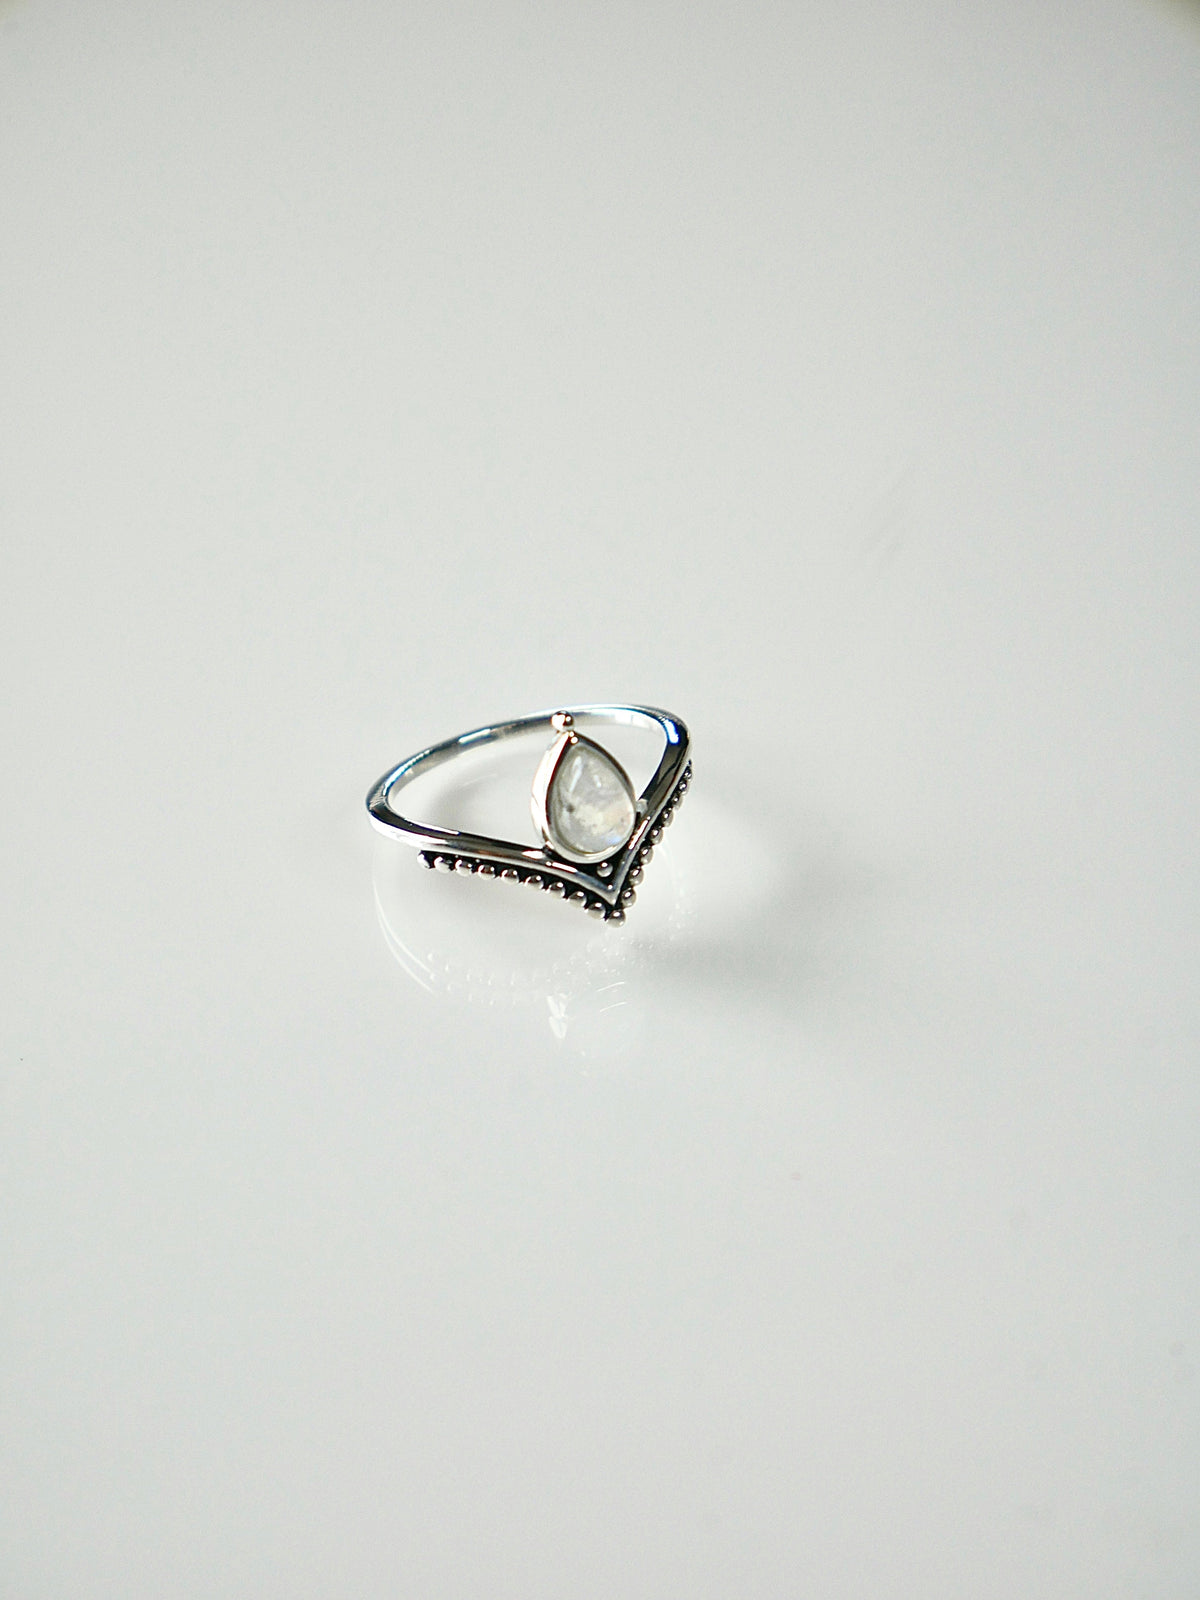 rings, silver rings, moonstone rings, sterling silver rings, rainbow moonstone rings , 925, waterproof rings, designer rings, new rings, trending jewelry, fashion jewelry, gemstone rings, birthstone rings, dainty rings, fashion jewelry, accessories, pear shape rings, kelsey jewelry, trending on tiktok, birthday gifts, anniversary gifts, black friday jewelry, graduation gifts , waterproof rings, dainty jewelry, fine jewelry, designer rings